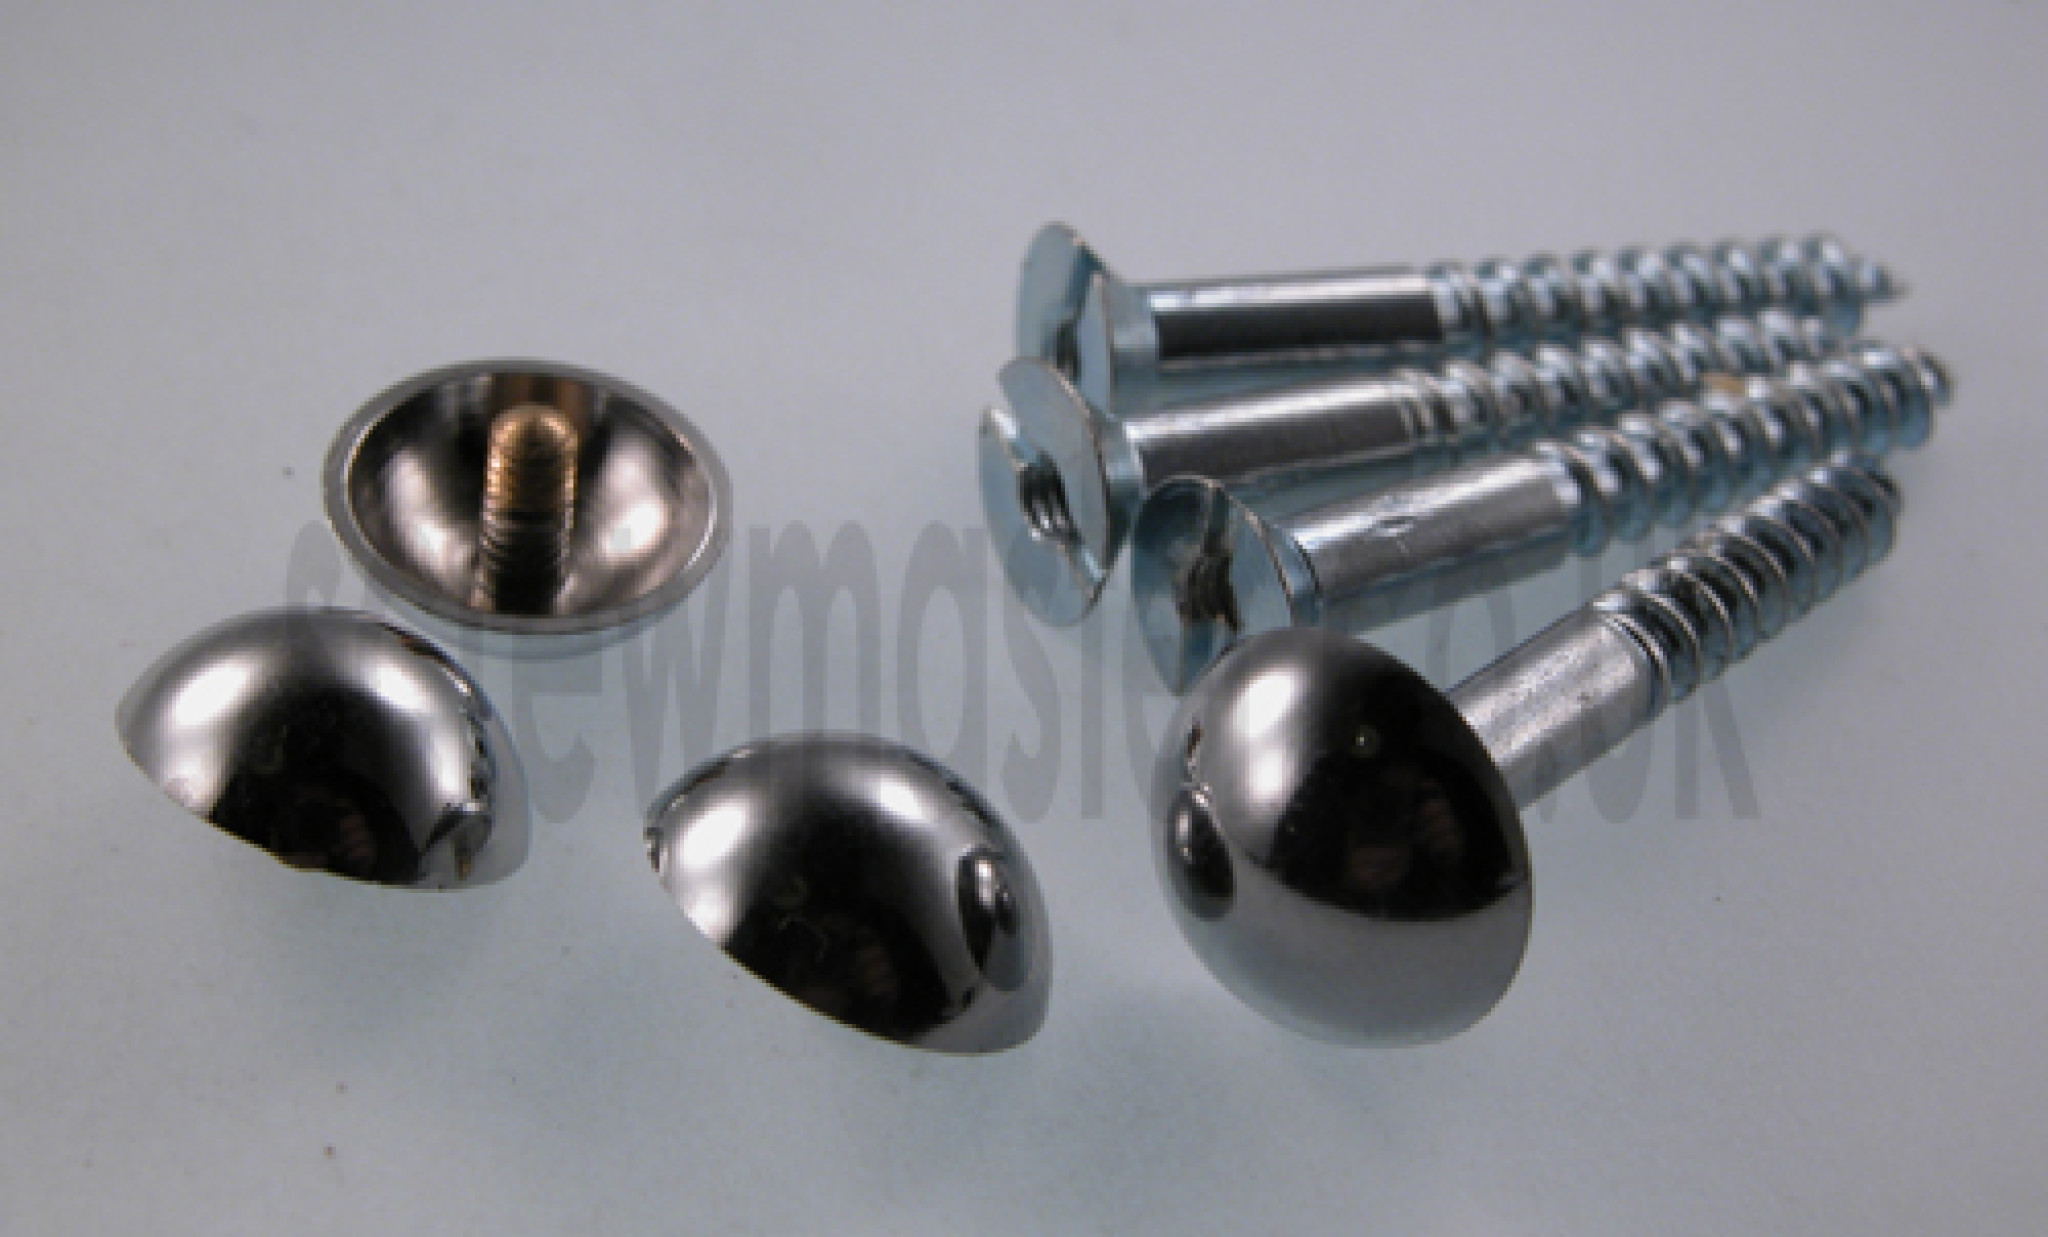 MIRROR DOME SCREWS BRITISH MADE 3/4 INCH 8 GAUGE CHROME PLATED BRASS 10 PACK 